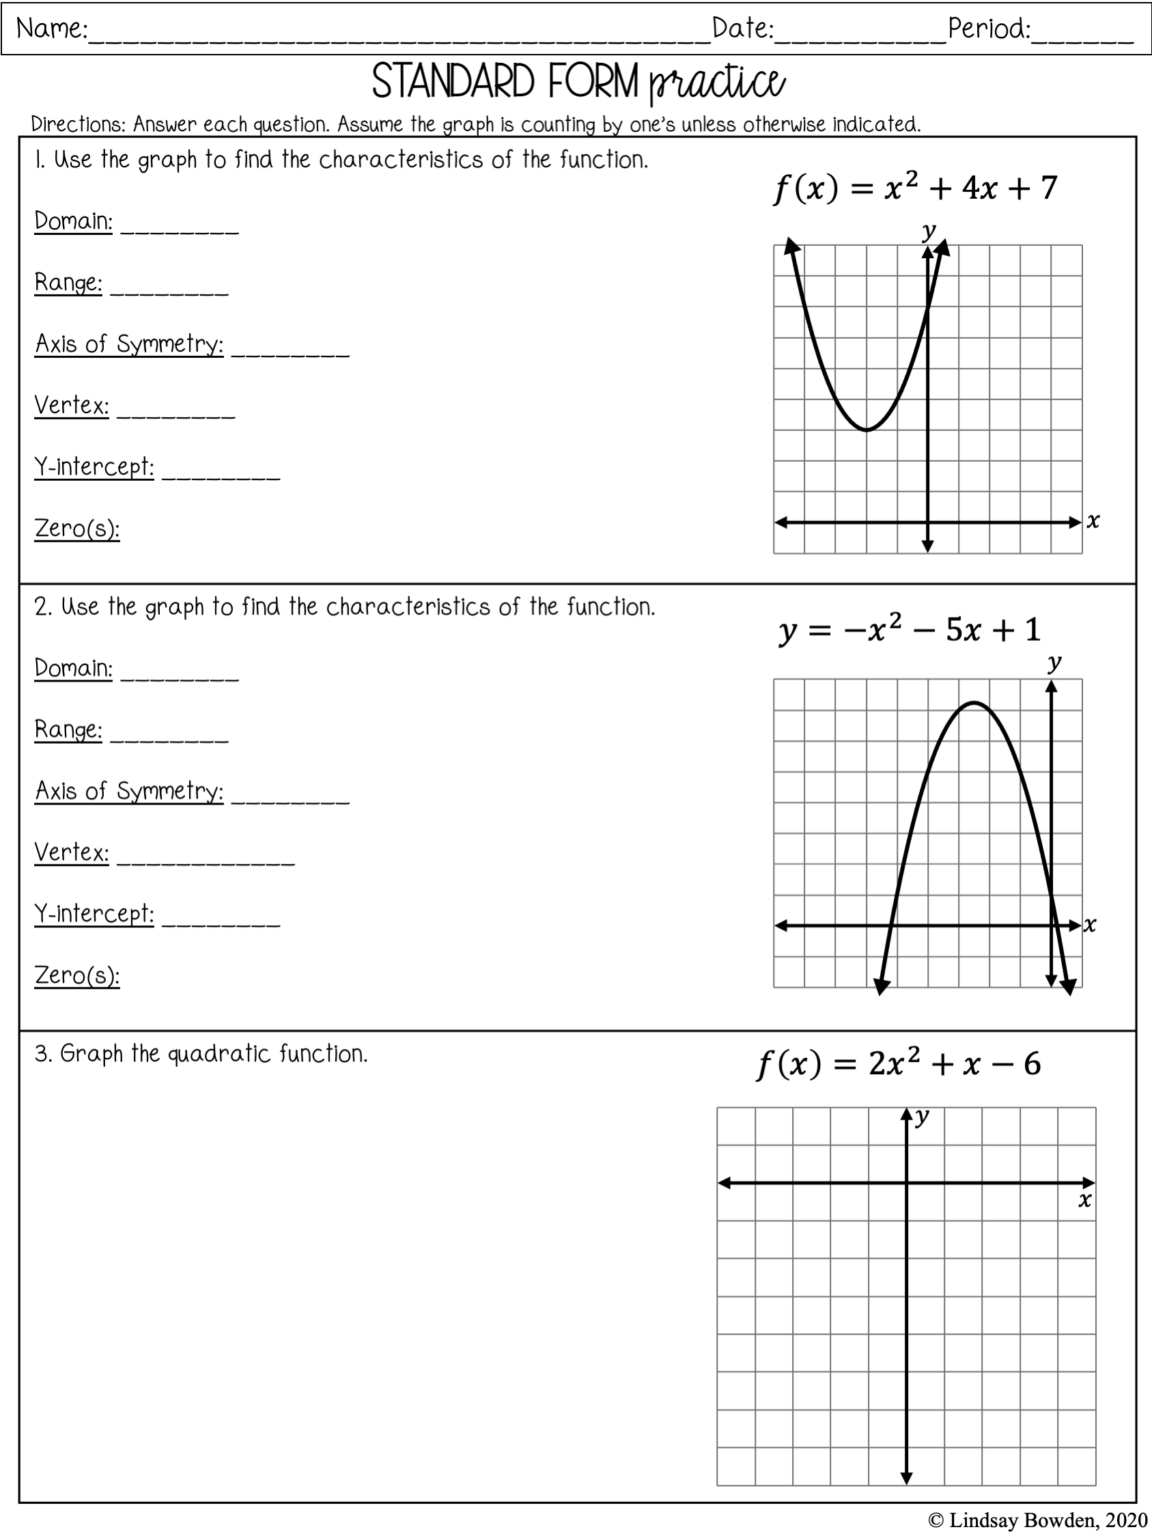 Graphing Quadratics Notes and Worksheets - Lindsay Bowden